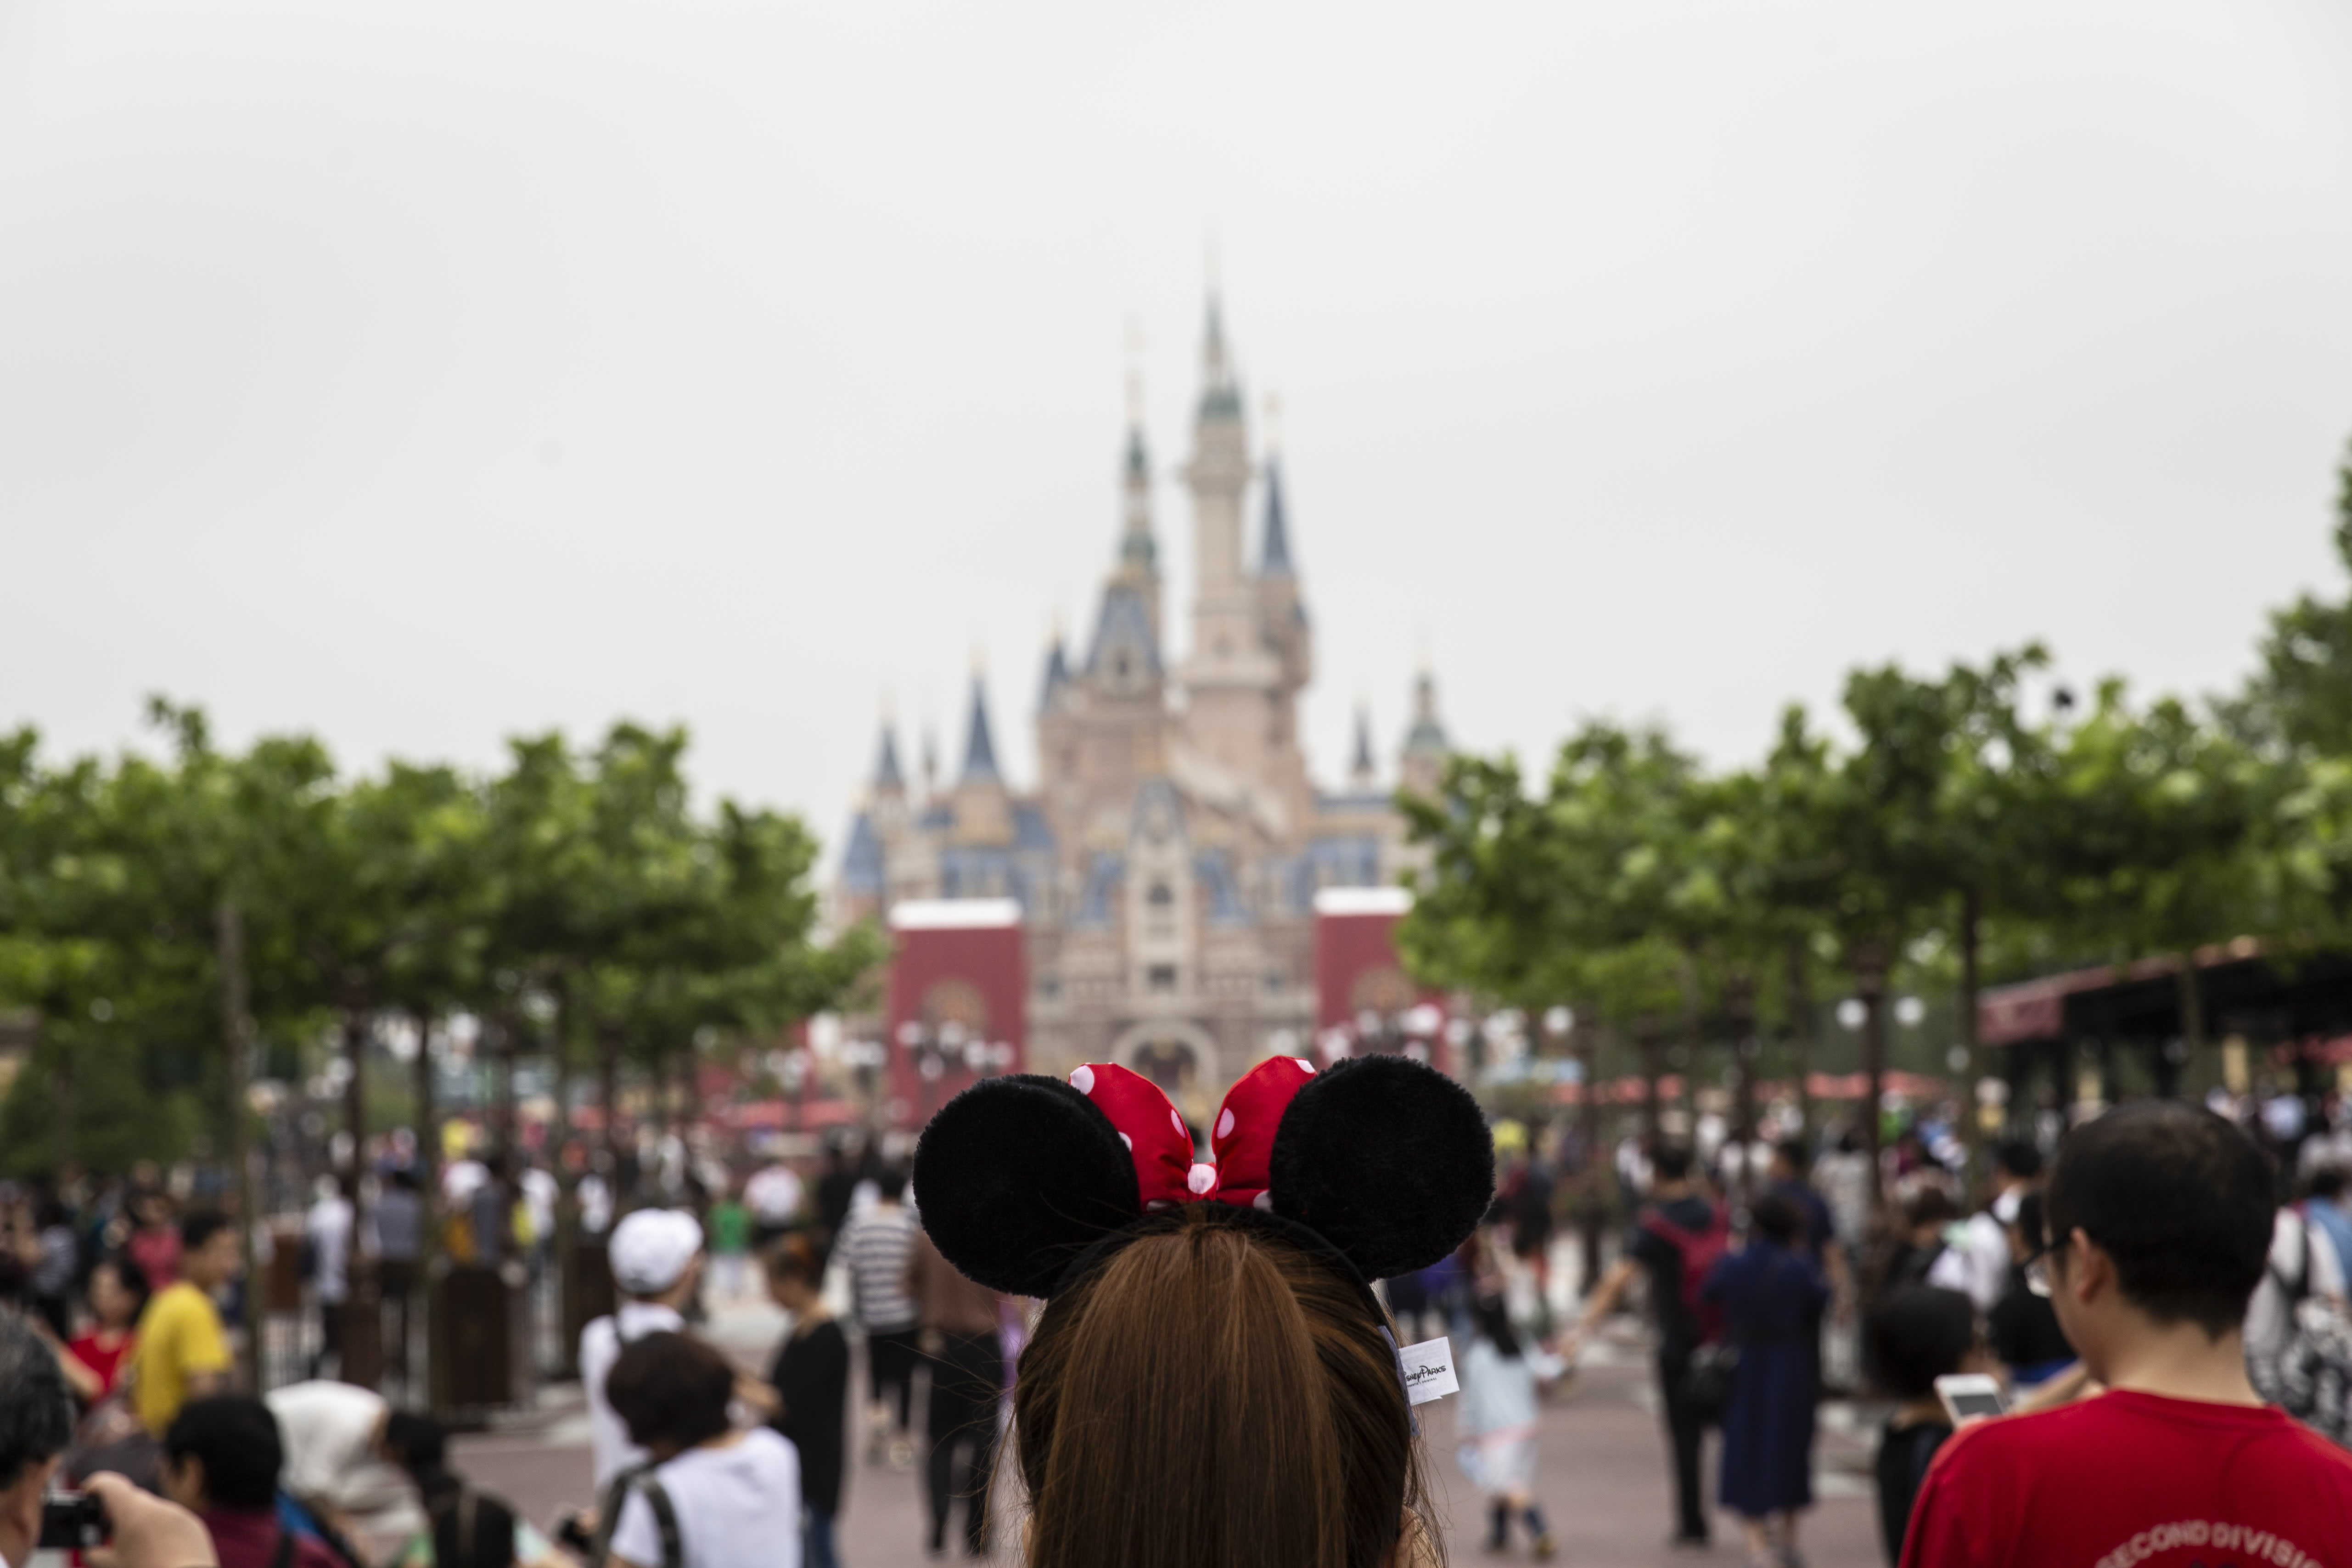 Disney Credit Card Review: Which is best for theme park visits?